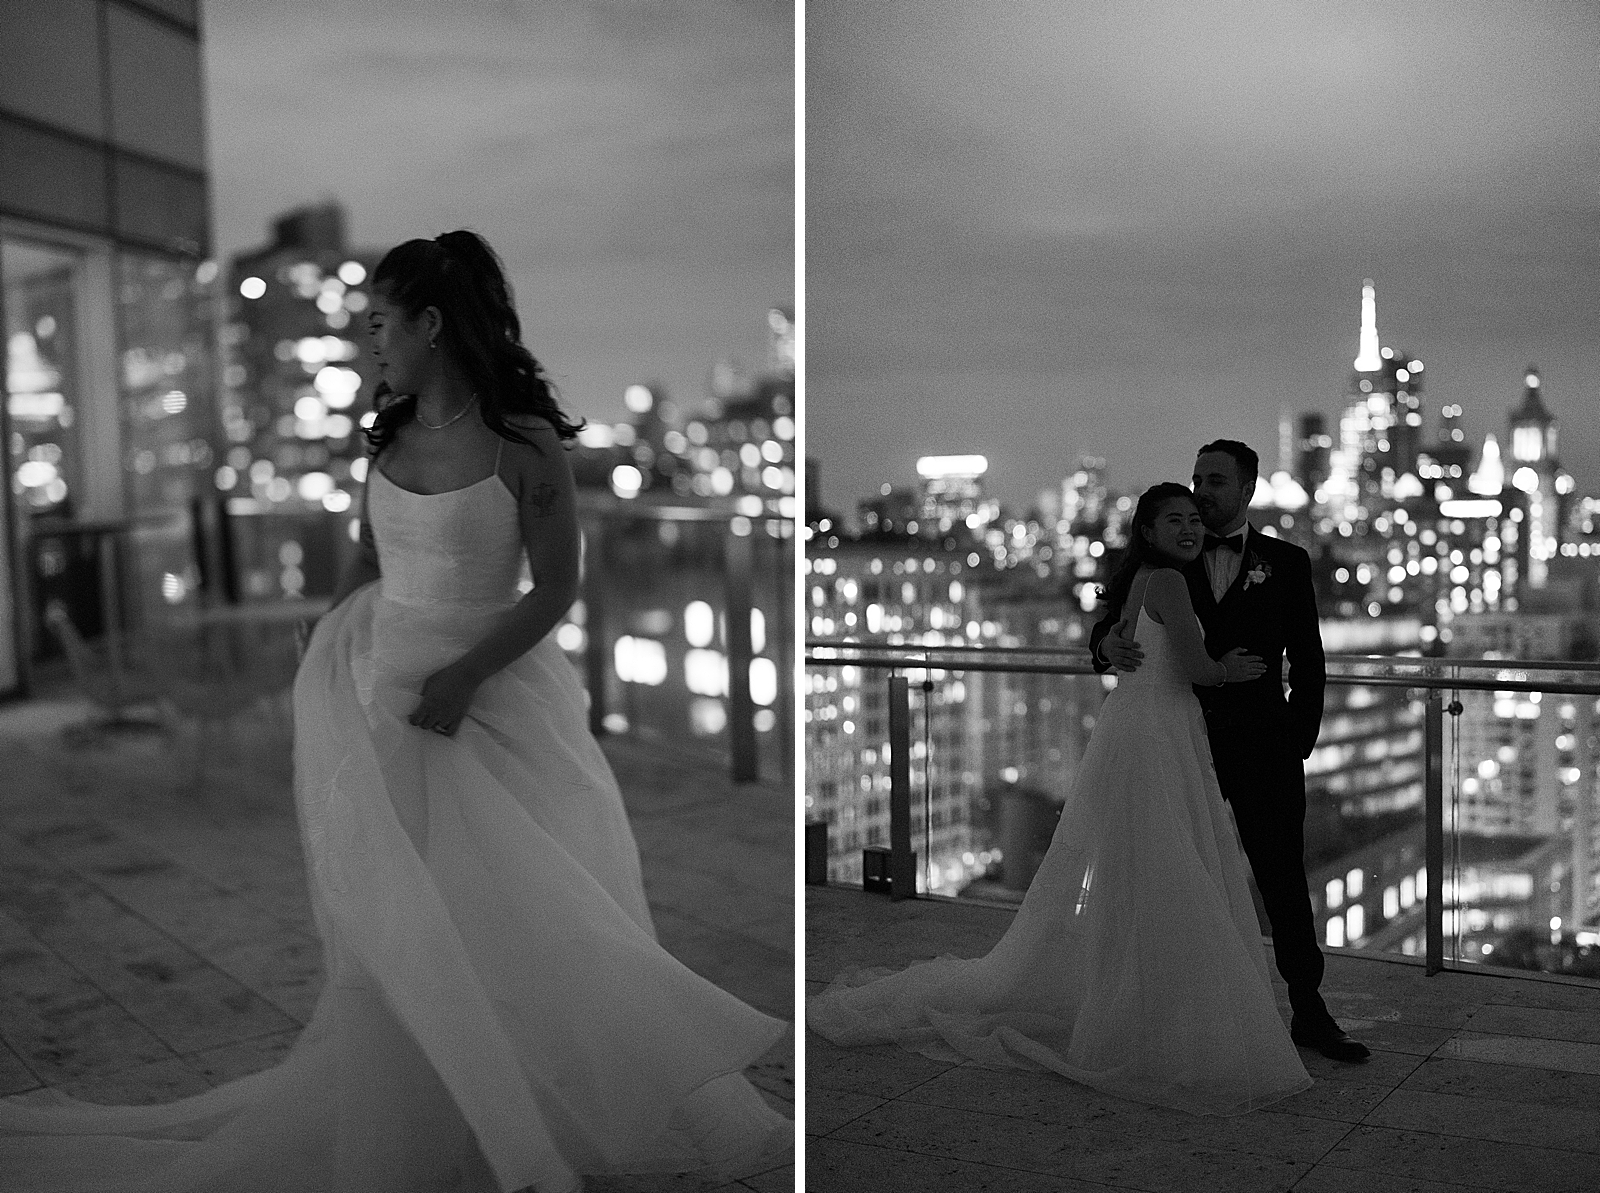 Left photo: Black and white shot of the bride standing on the hotel rooftop.
Right photo: Black and white shot of the bride and groom embracing on the hotel rooftop with the New York City skyline behind them. 